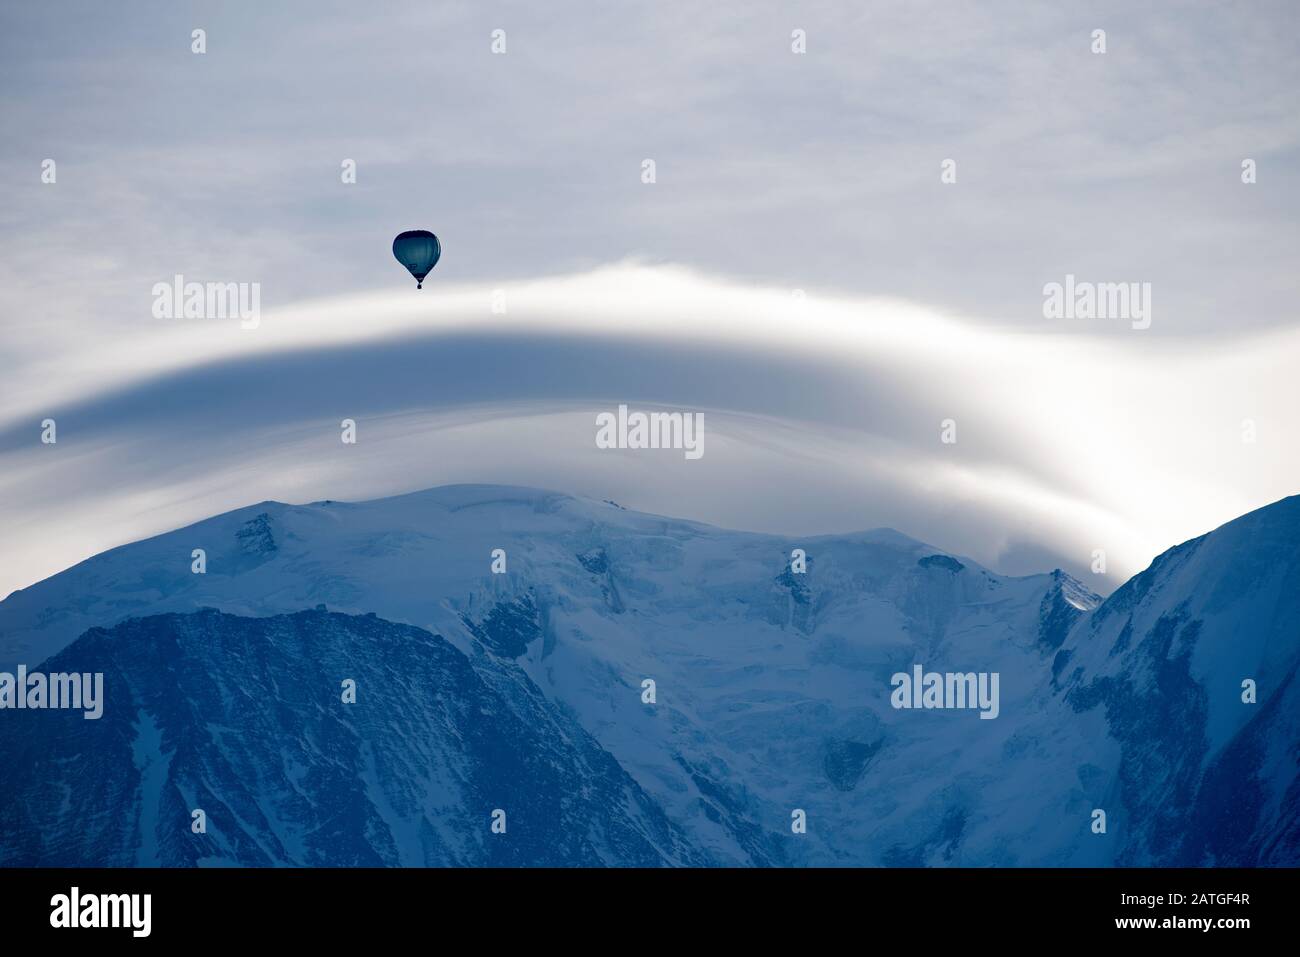 France, Haute-Savoie (74), Alps, Mont Blanc (4807 m) with lenticular cloud and hot air balloon Stock Photo